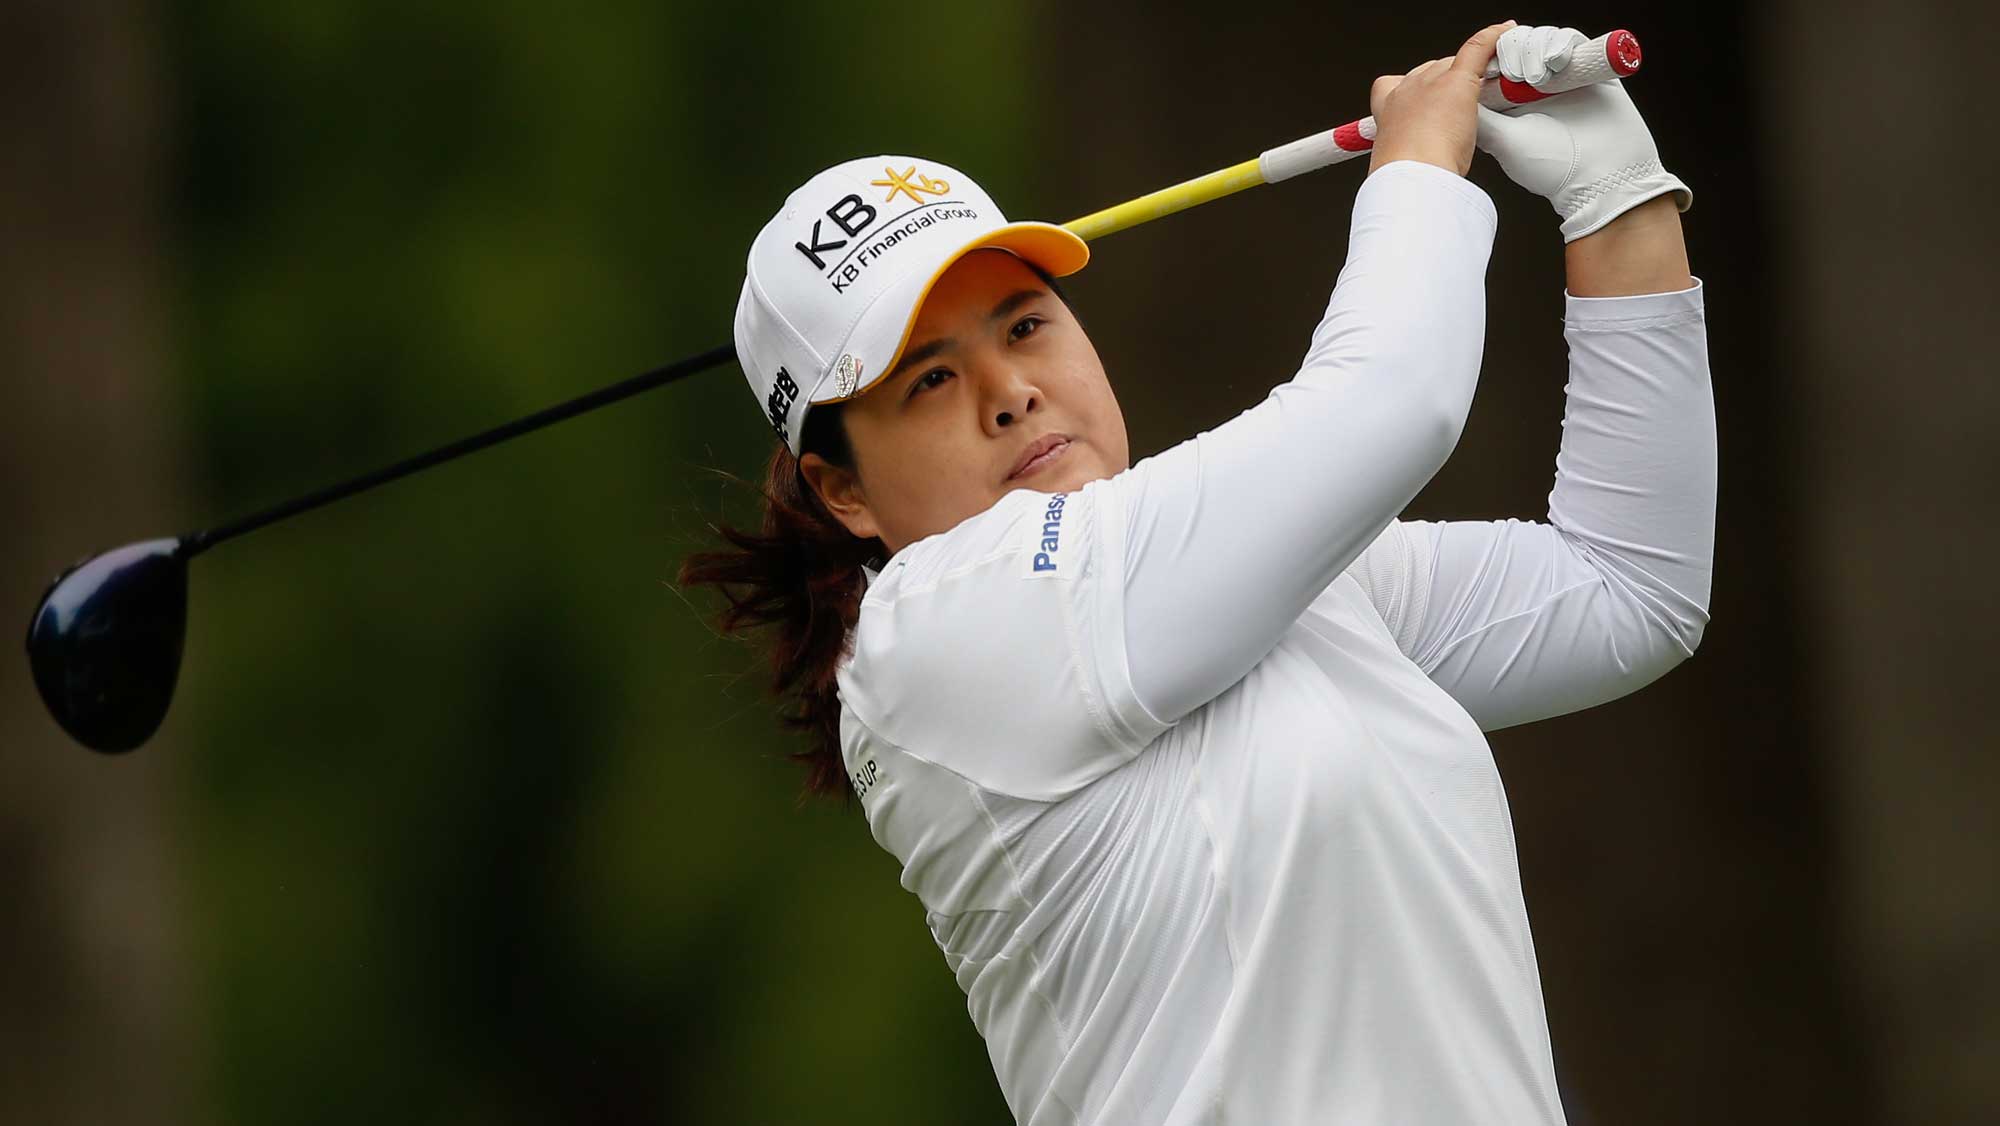 Inbee Park of South Korea hits a tee shot on the third tee during the first round of the KPMG Women's PGA Championship